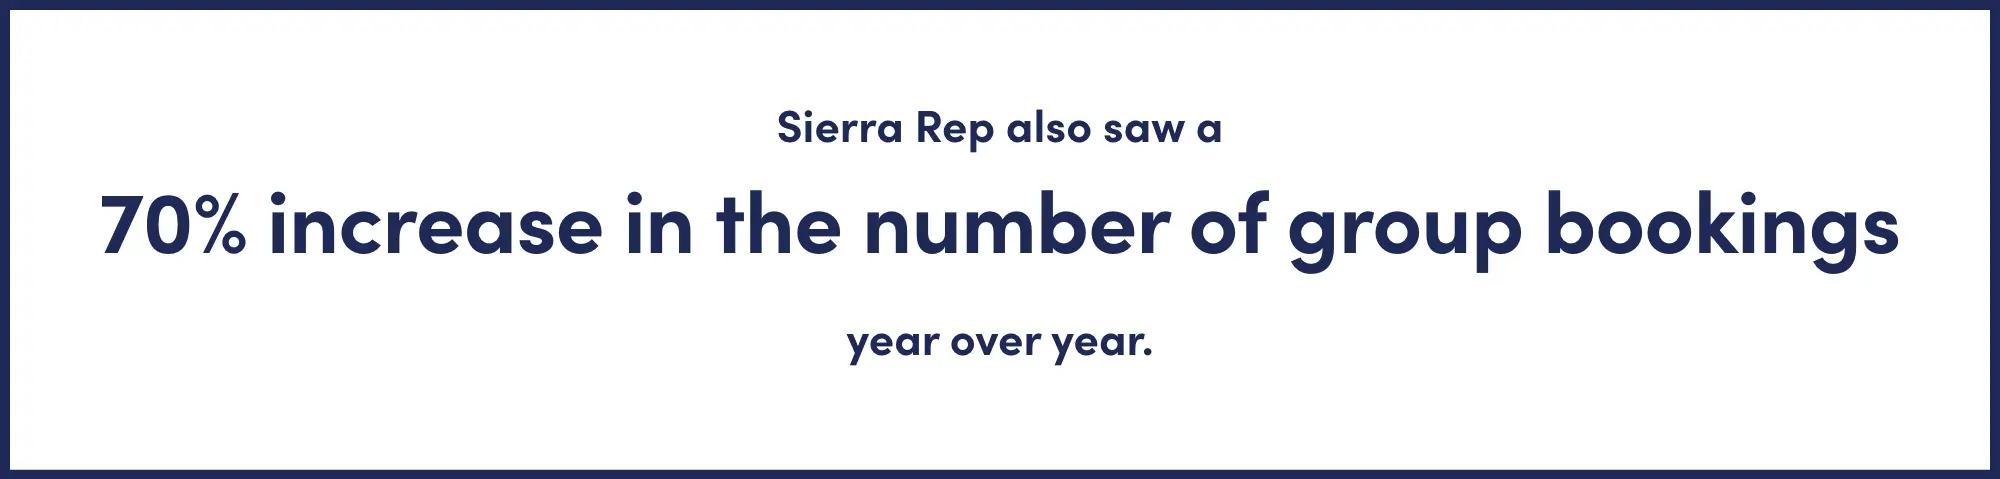 Sierra Rep also saw a 70% increase in the number of group bookings year over year. 